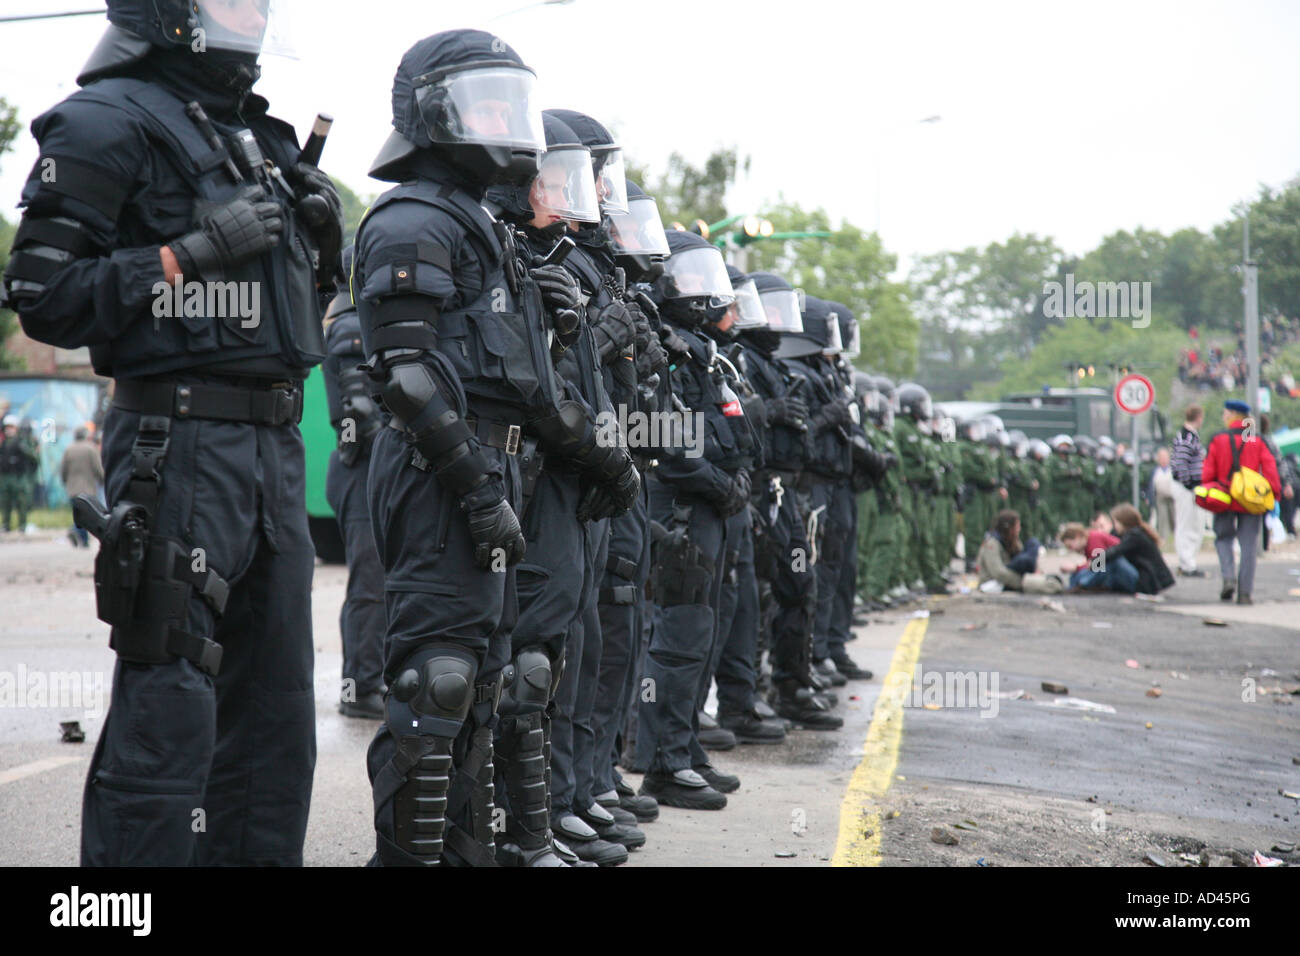 Lined up police officers with helmets on a police intervention, Heiligendamm, Rostock, Germany Stock Photo